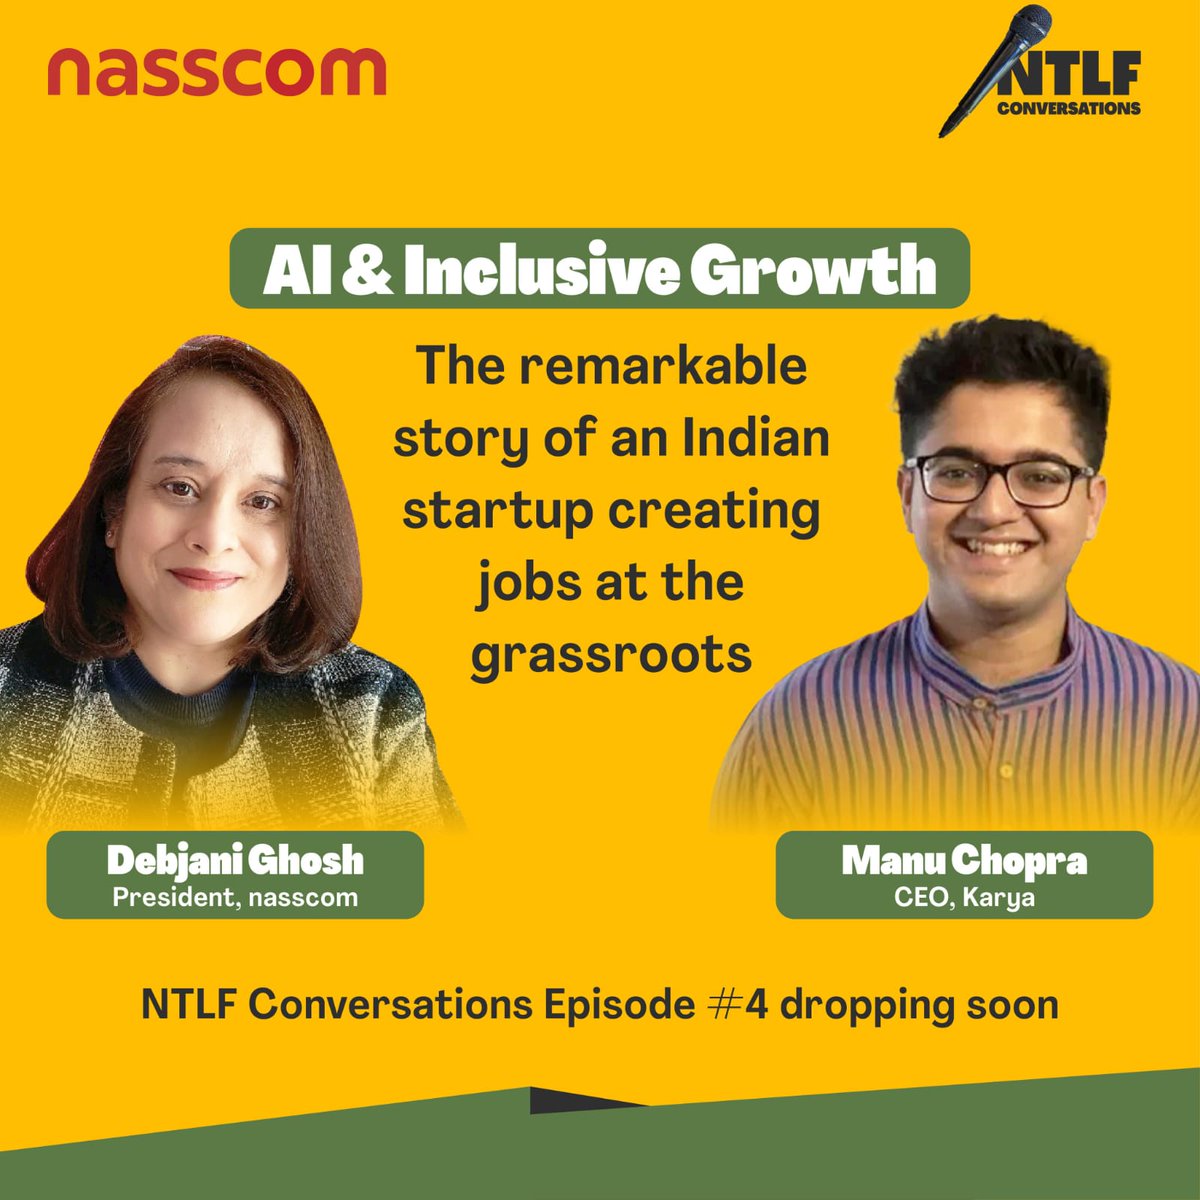 🎙️Coming soon!
Watch the uplifting episode of #NTLFconversations featuring @debjani_ghosh_ and @manuchopra42, discussing the transformative power of AI-driven impact to eradicate poverty by deploying AI solutions to uplift rural India from poverty.
With @nasscomevents  @karya_inc